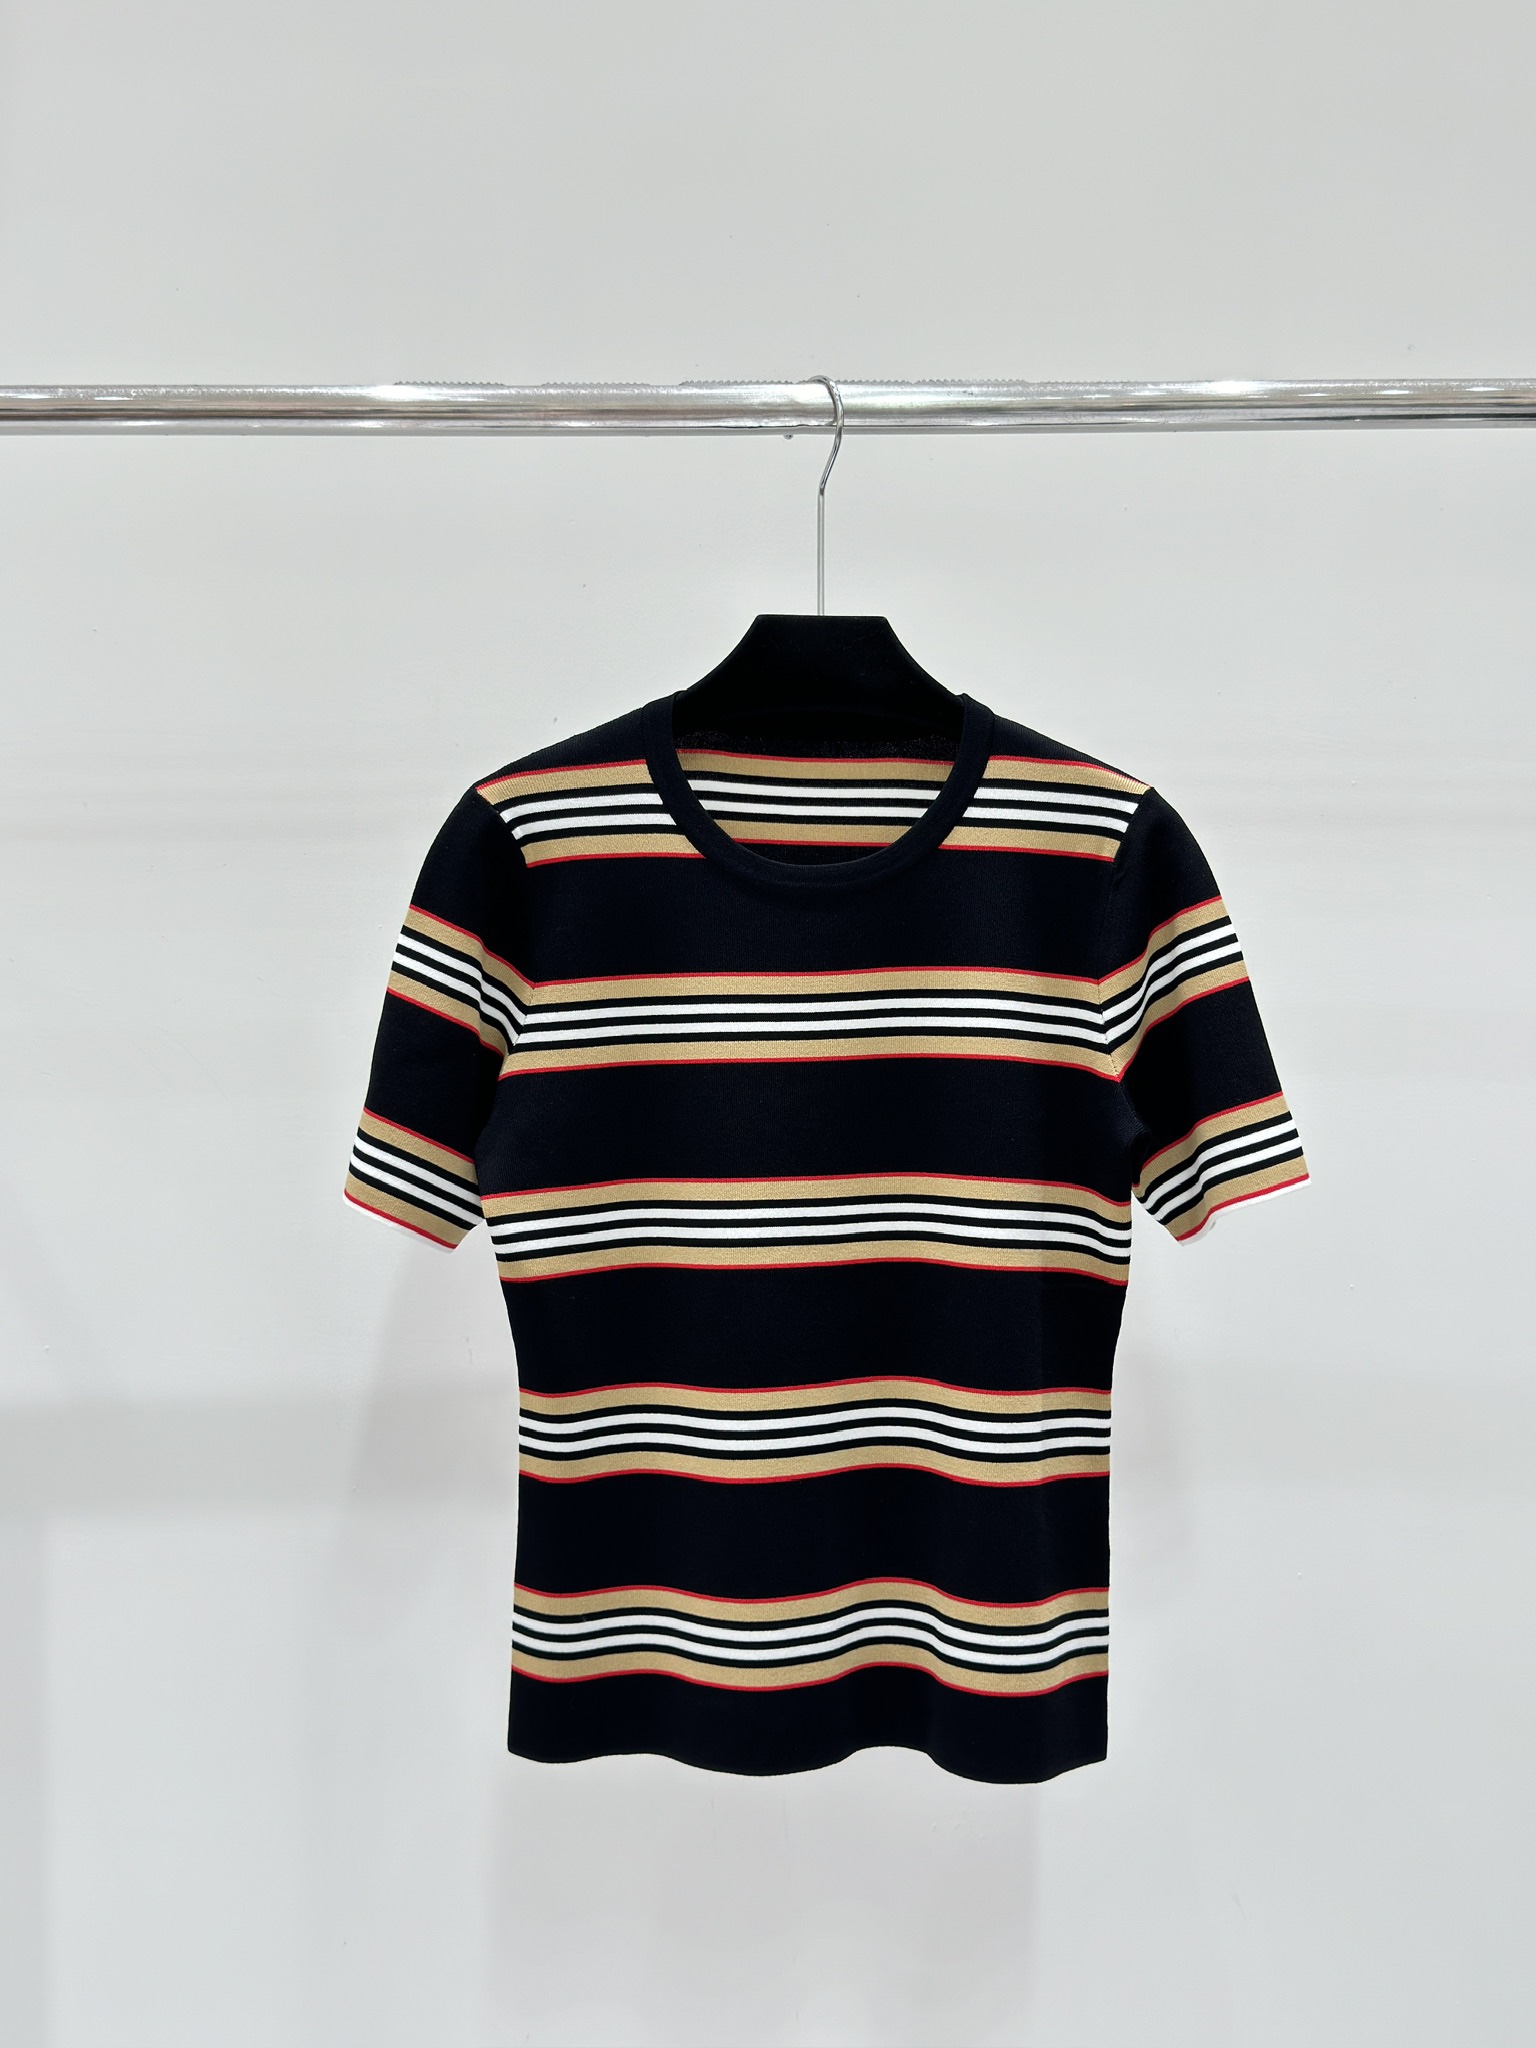 Copy
 Burberry Clothing T-Shirt Fashion Designer
 Knitting Spring/Summer Collection Short Sleeve